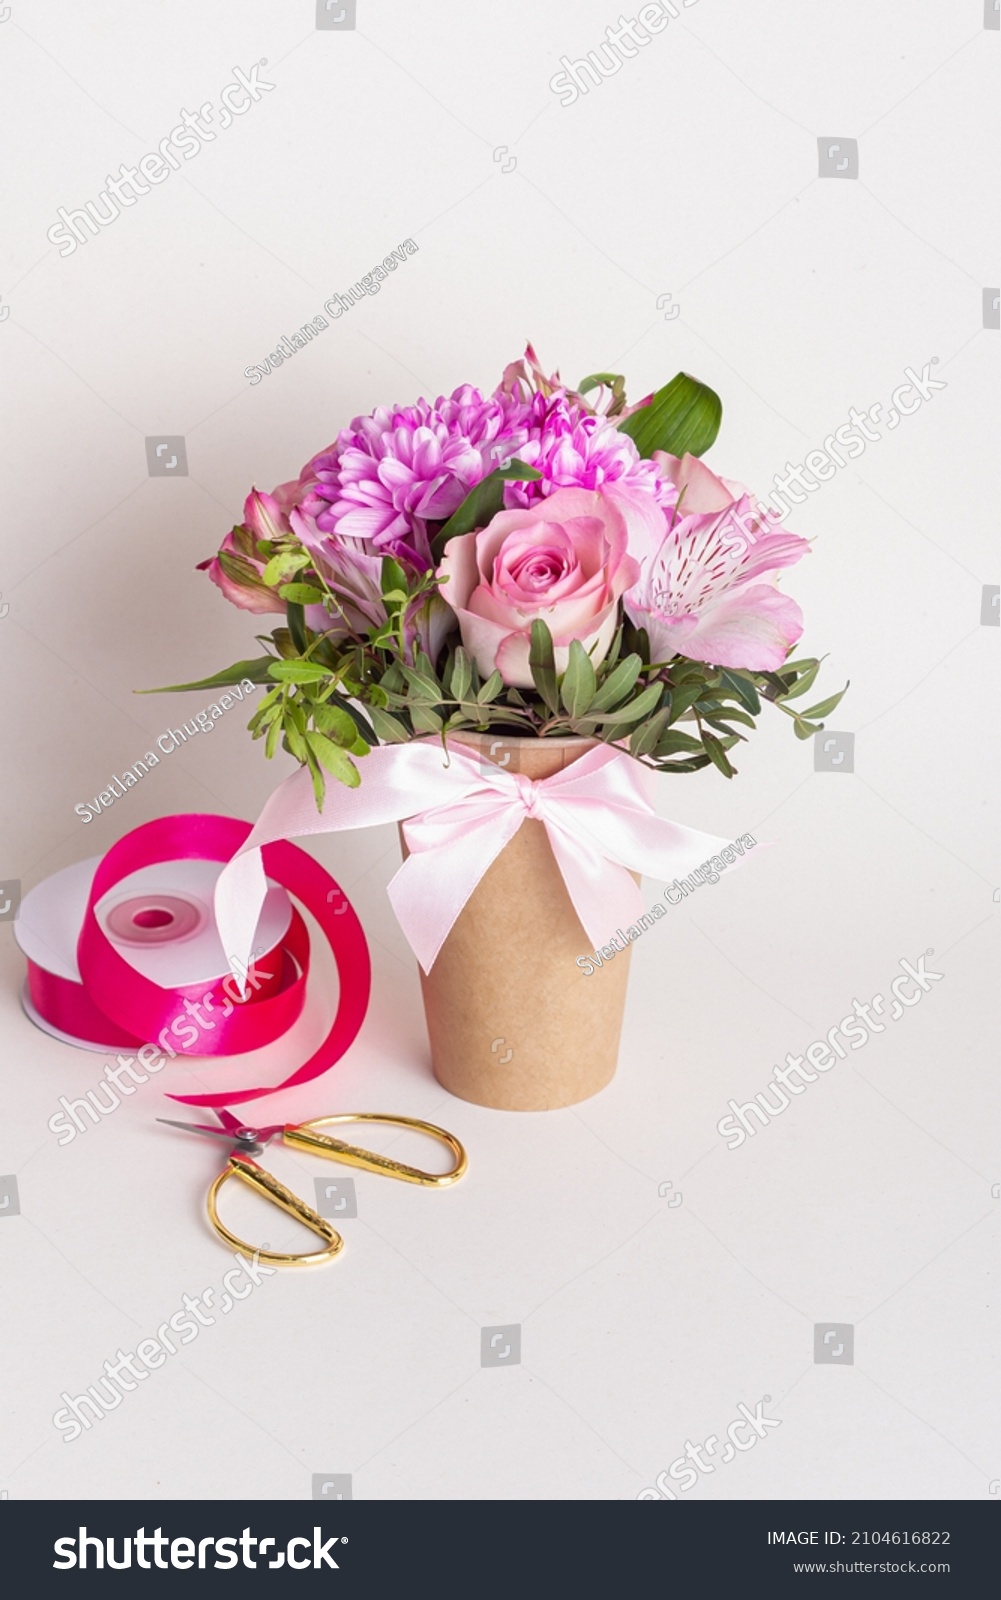 Delicate floral arrangement in paper cup. Gift for Woman's Day or Valentine's Day. Pink roses and chrysanthemums #2104616822